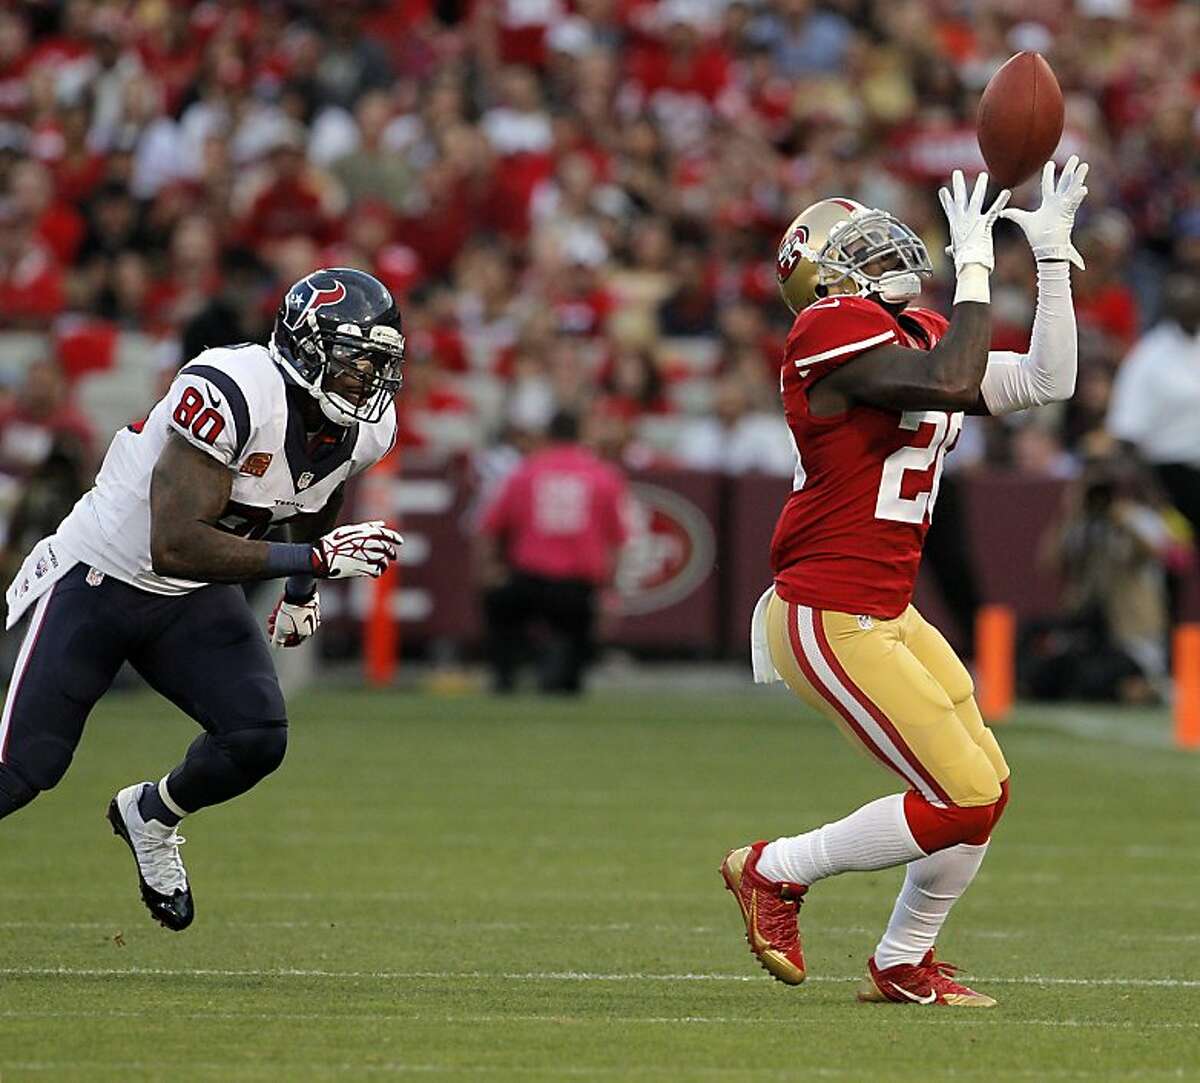 Tramaine Brock waits for the pass intended for Andre Johnson before intercepting it in the second quarter. The San Francisco 49ers played the Houston Texans at Candlestick Park in San Francisco, Calif., on Sunday, October 6, 2013.